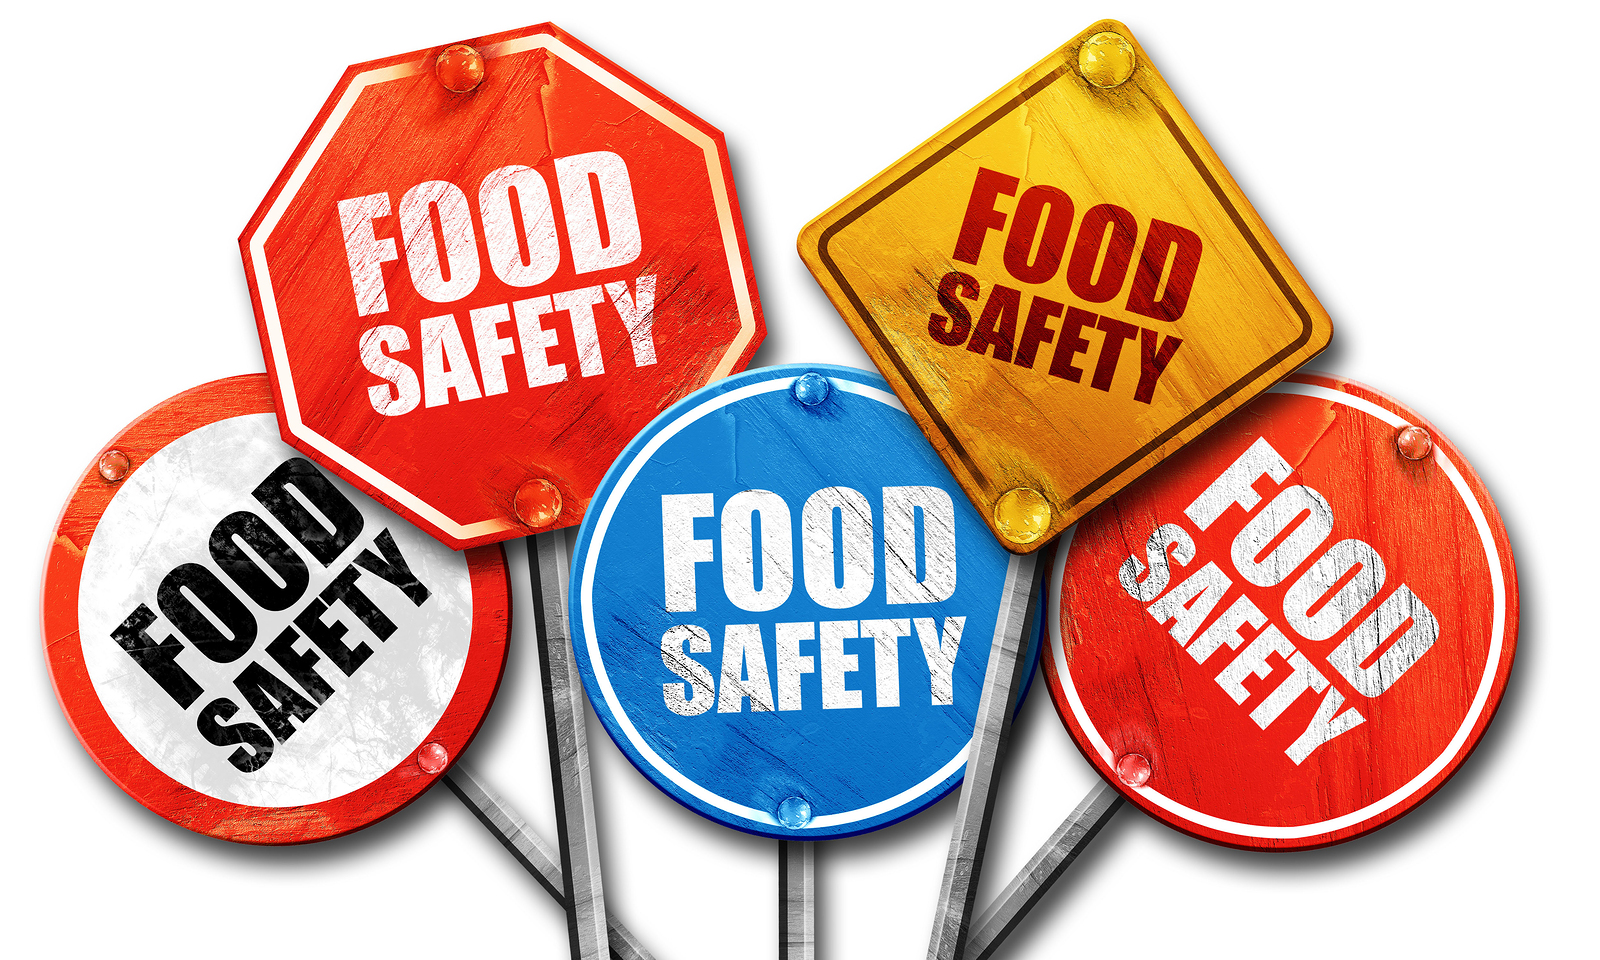 New Food Safety course launched for Manufacturing Sector ...